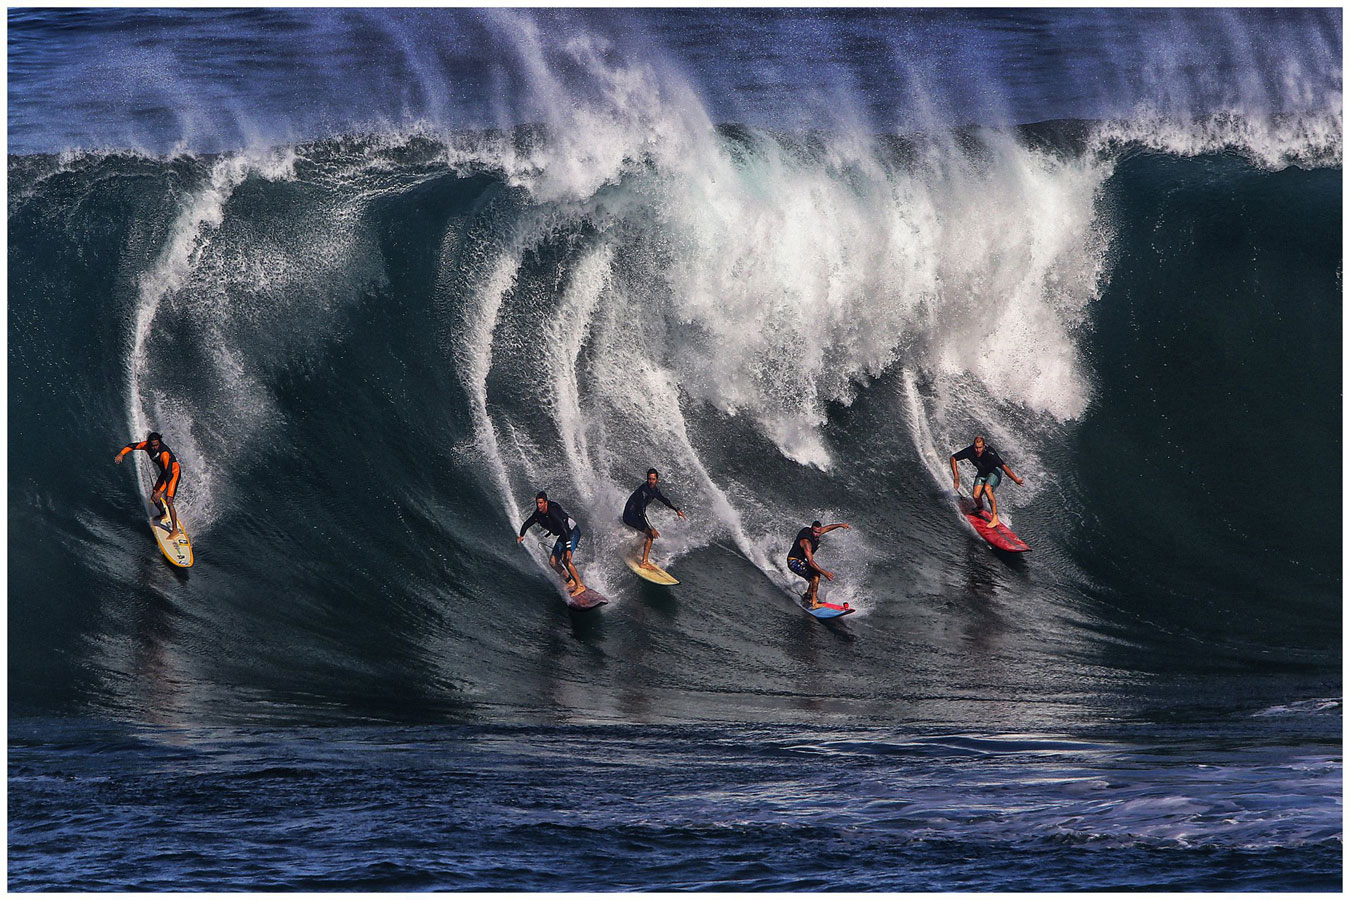 The Surfing Team, © Thomas Lang, United States, GPU Gold Medal, Onyx International Exhibition of Photography